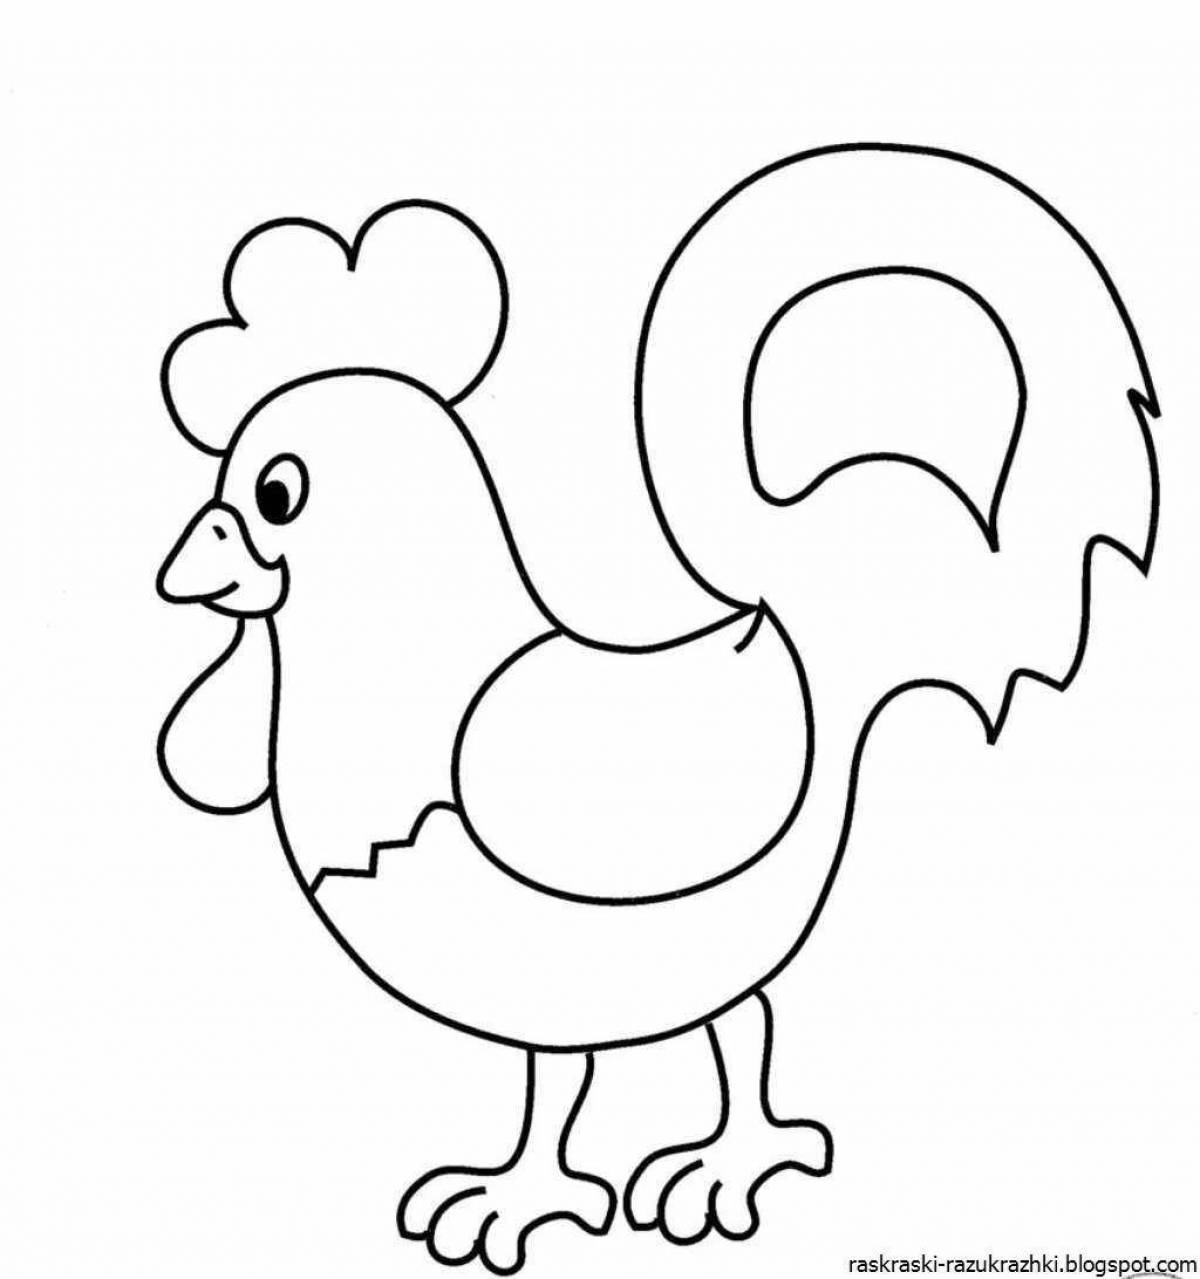 Fat cockerel coloring page for kids